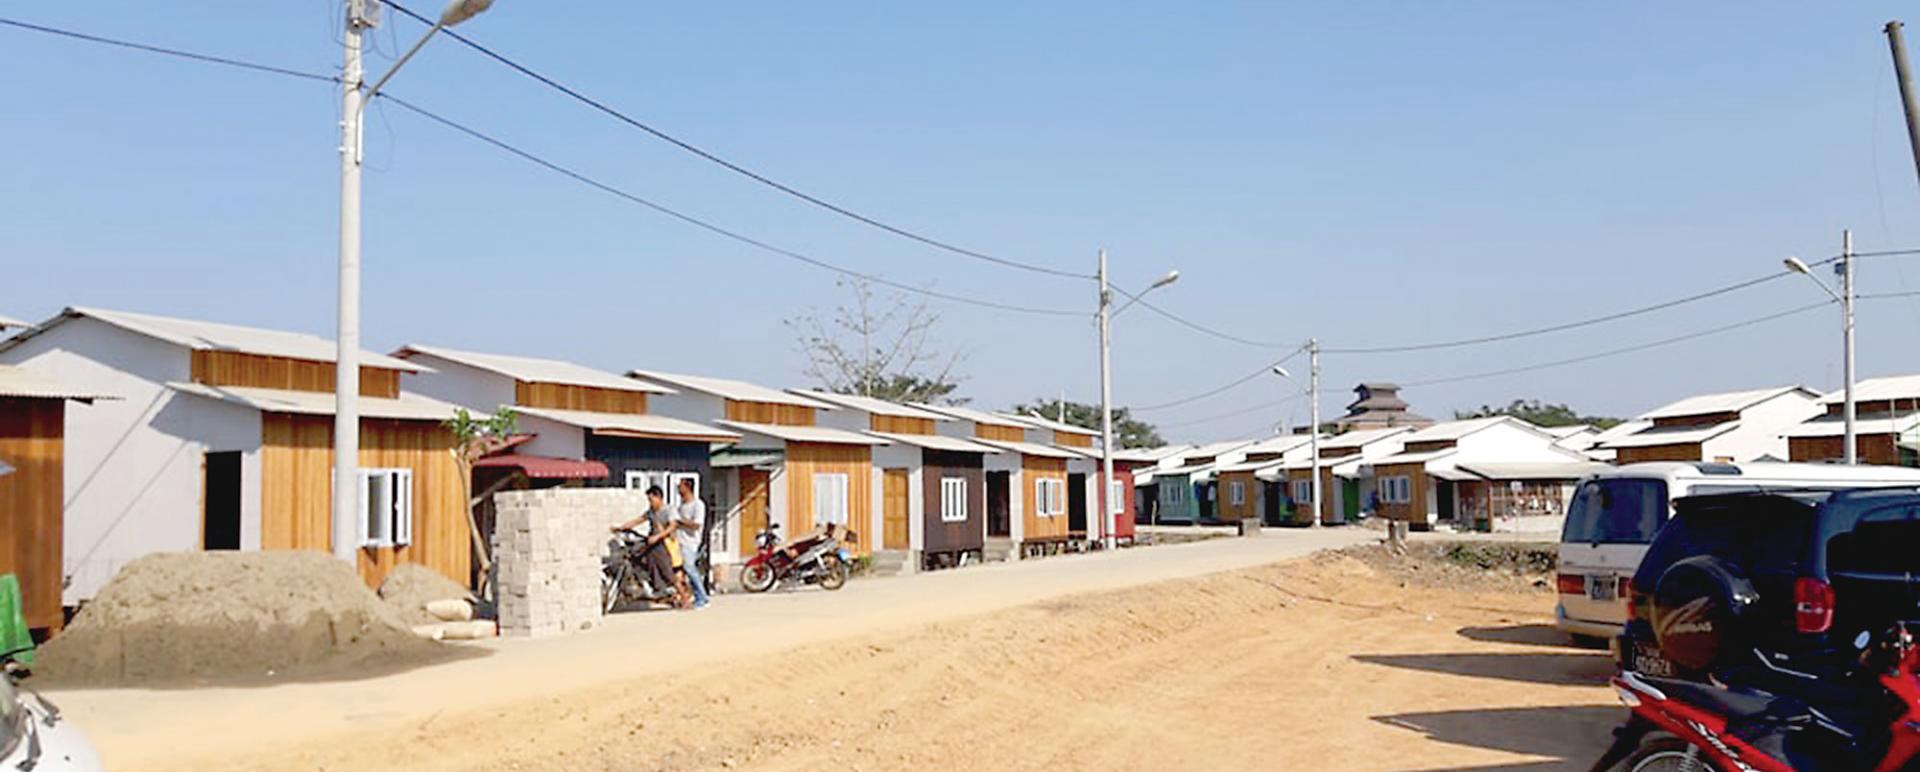 Community Land Housing being built in Shwepyitha Township